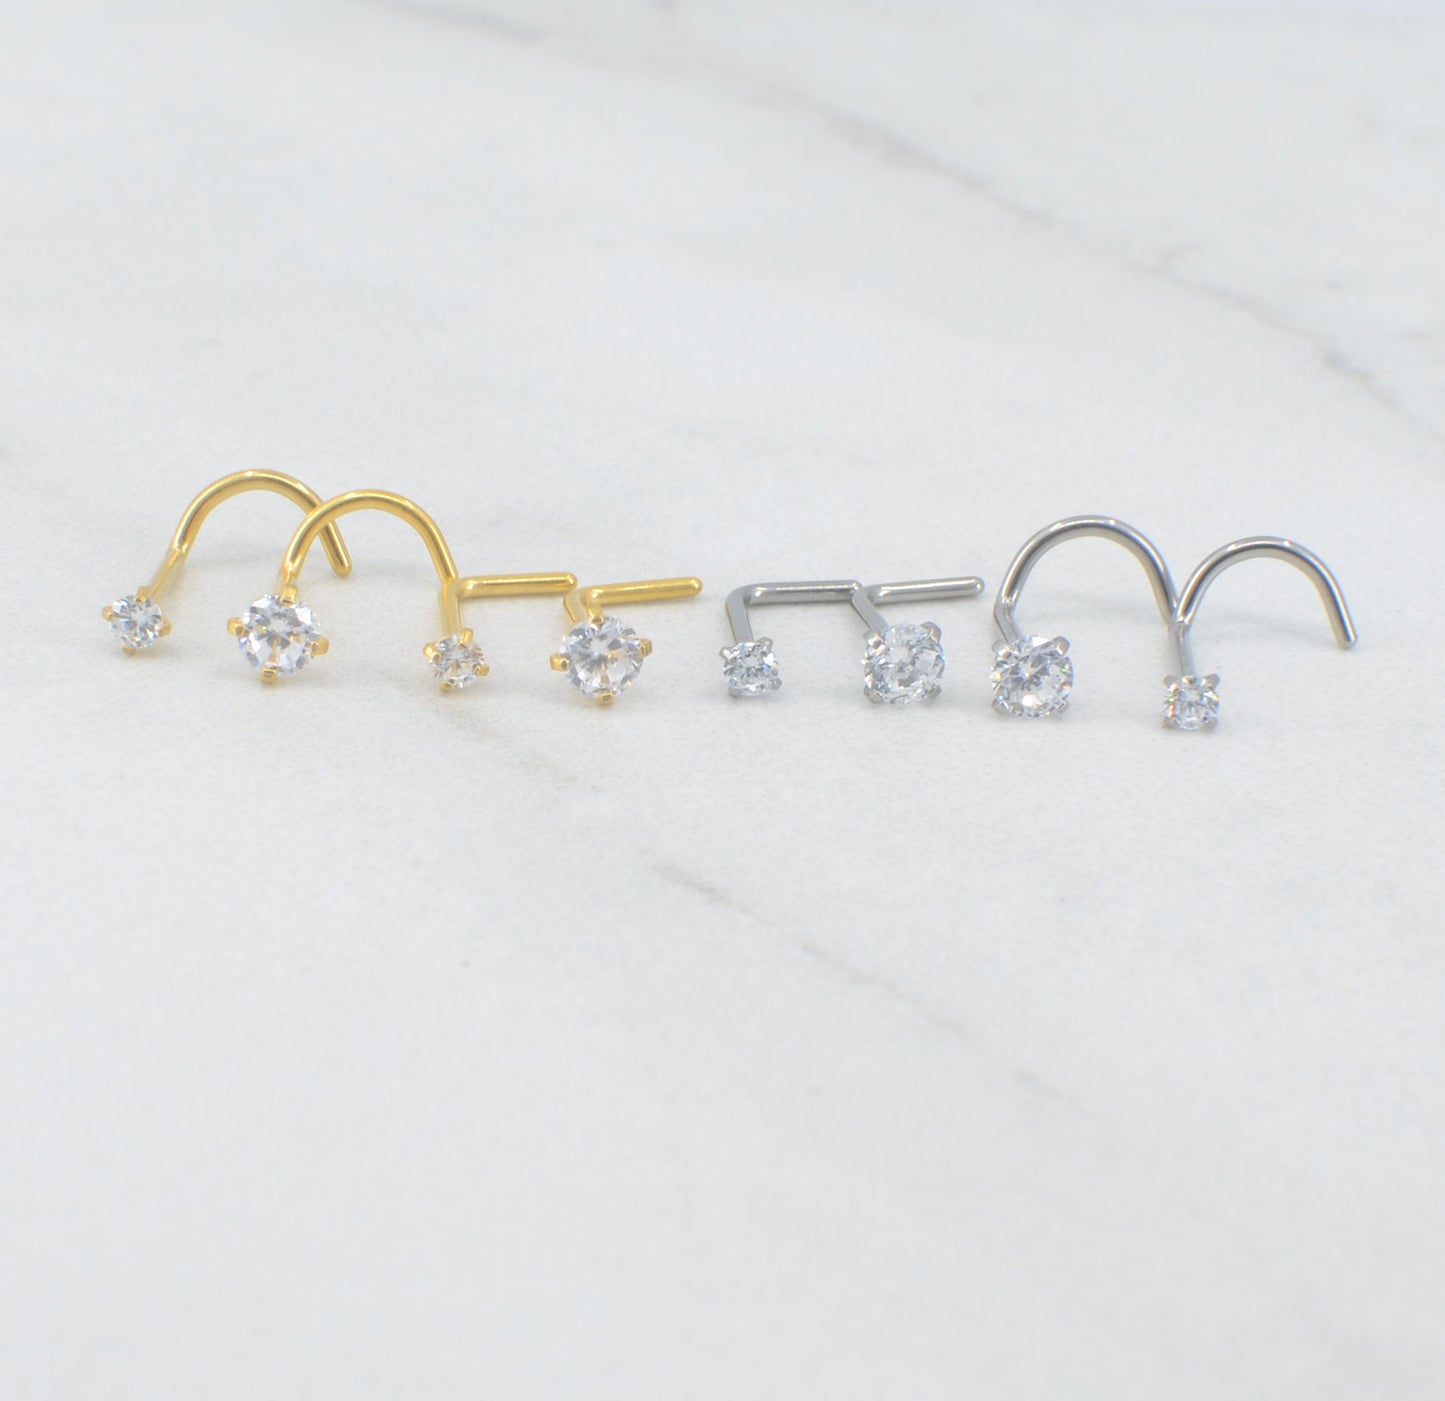 NEW-2mm/3mm L Shape Nose Rings -Implant Grade Titanium- Small Petite Stud Gold Tone 20G/18G -L Bend Nose Ring- Clear CZ Nose Screw